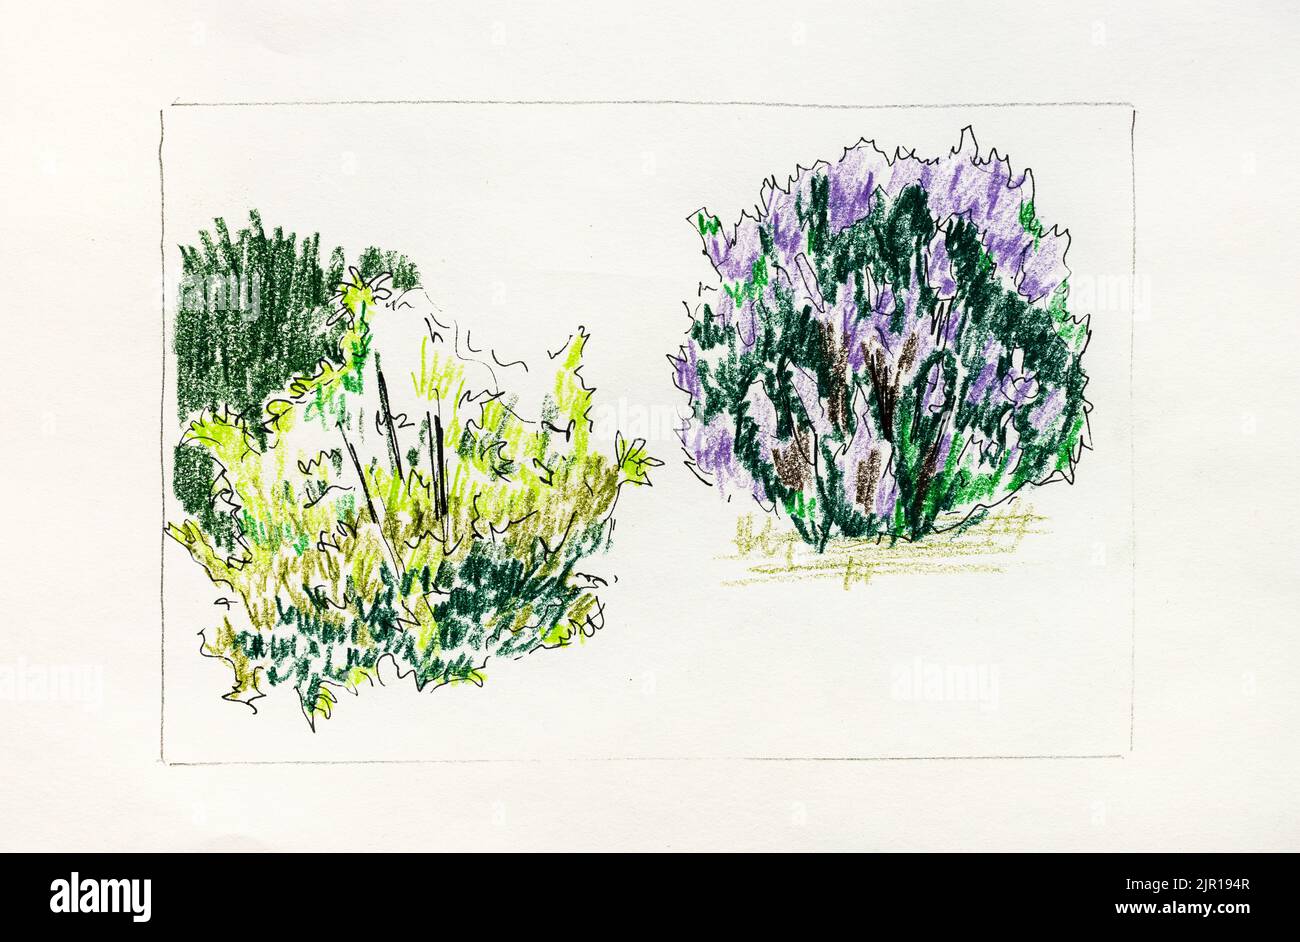 hand-drawn blossoming bushes by black pen and color pencils on old textured paper Stock Photo